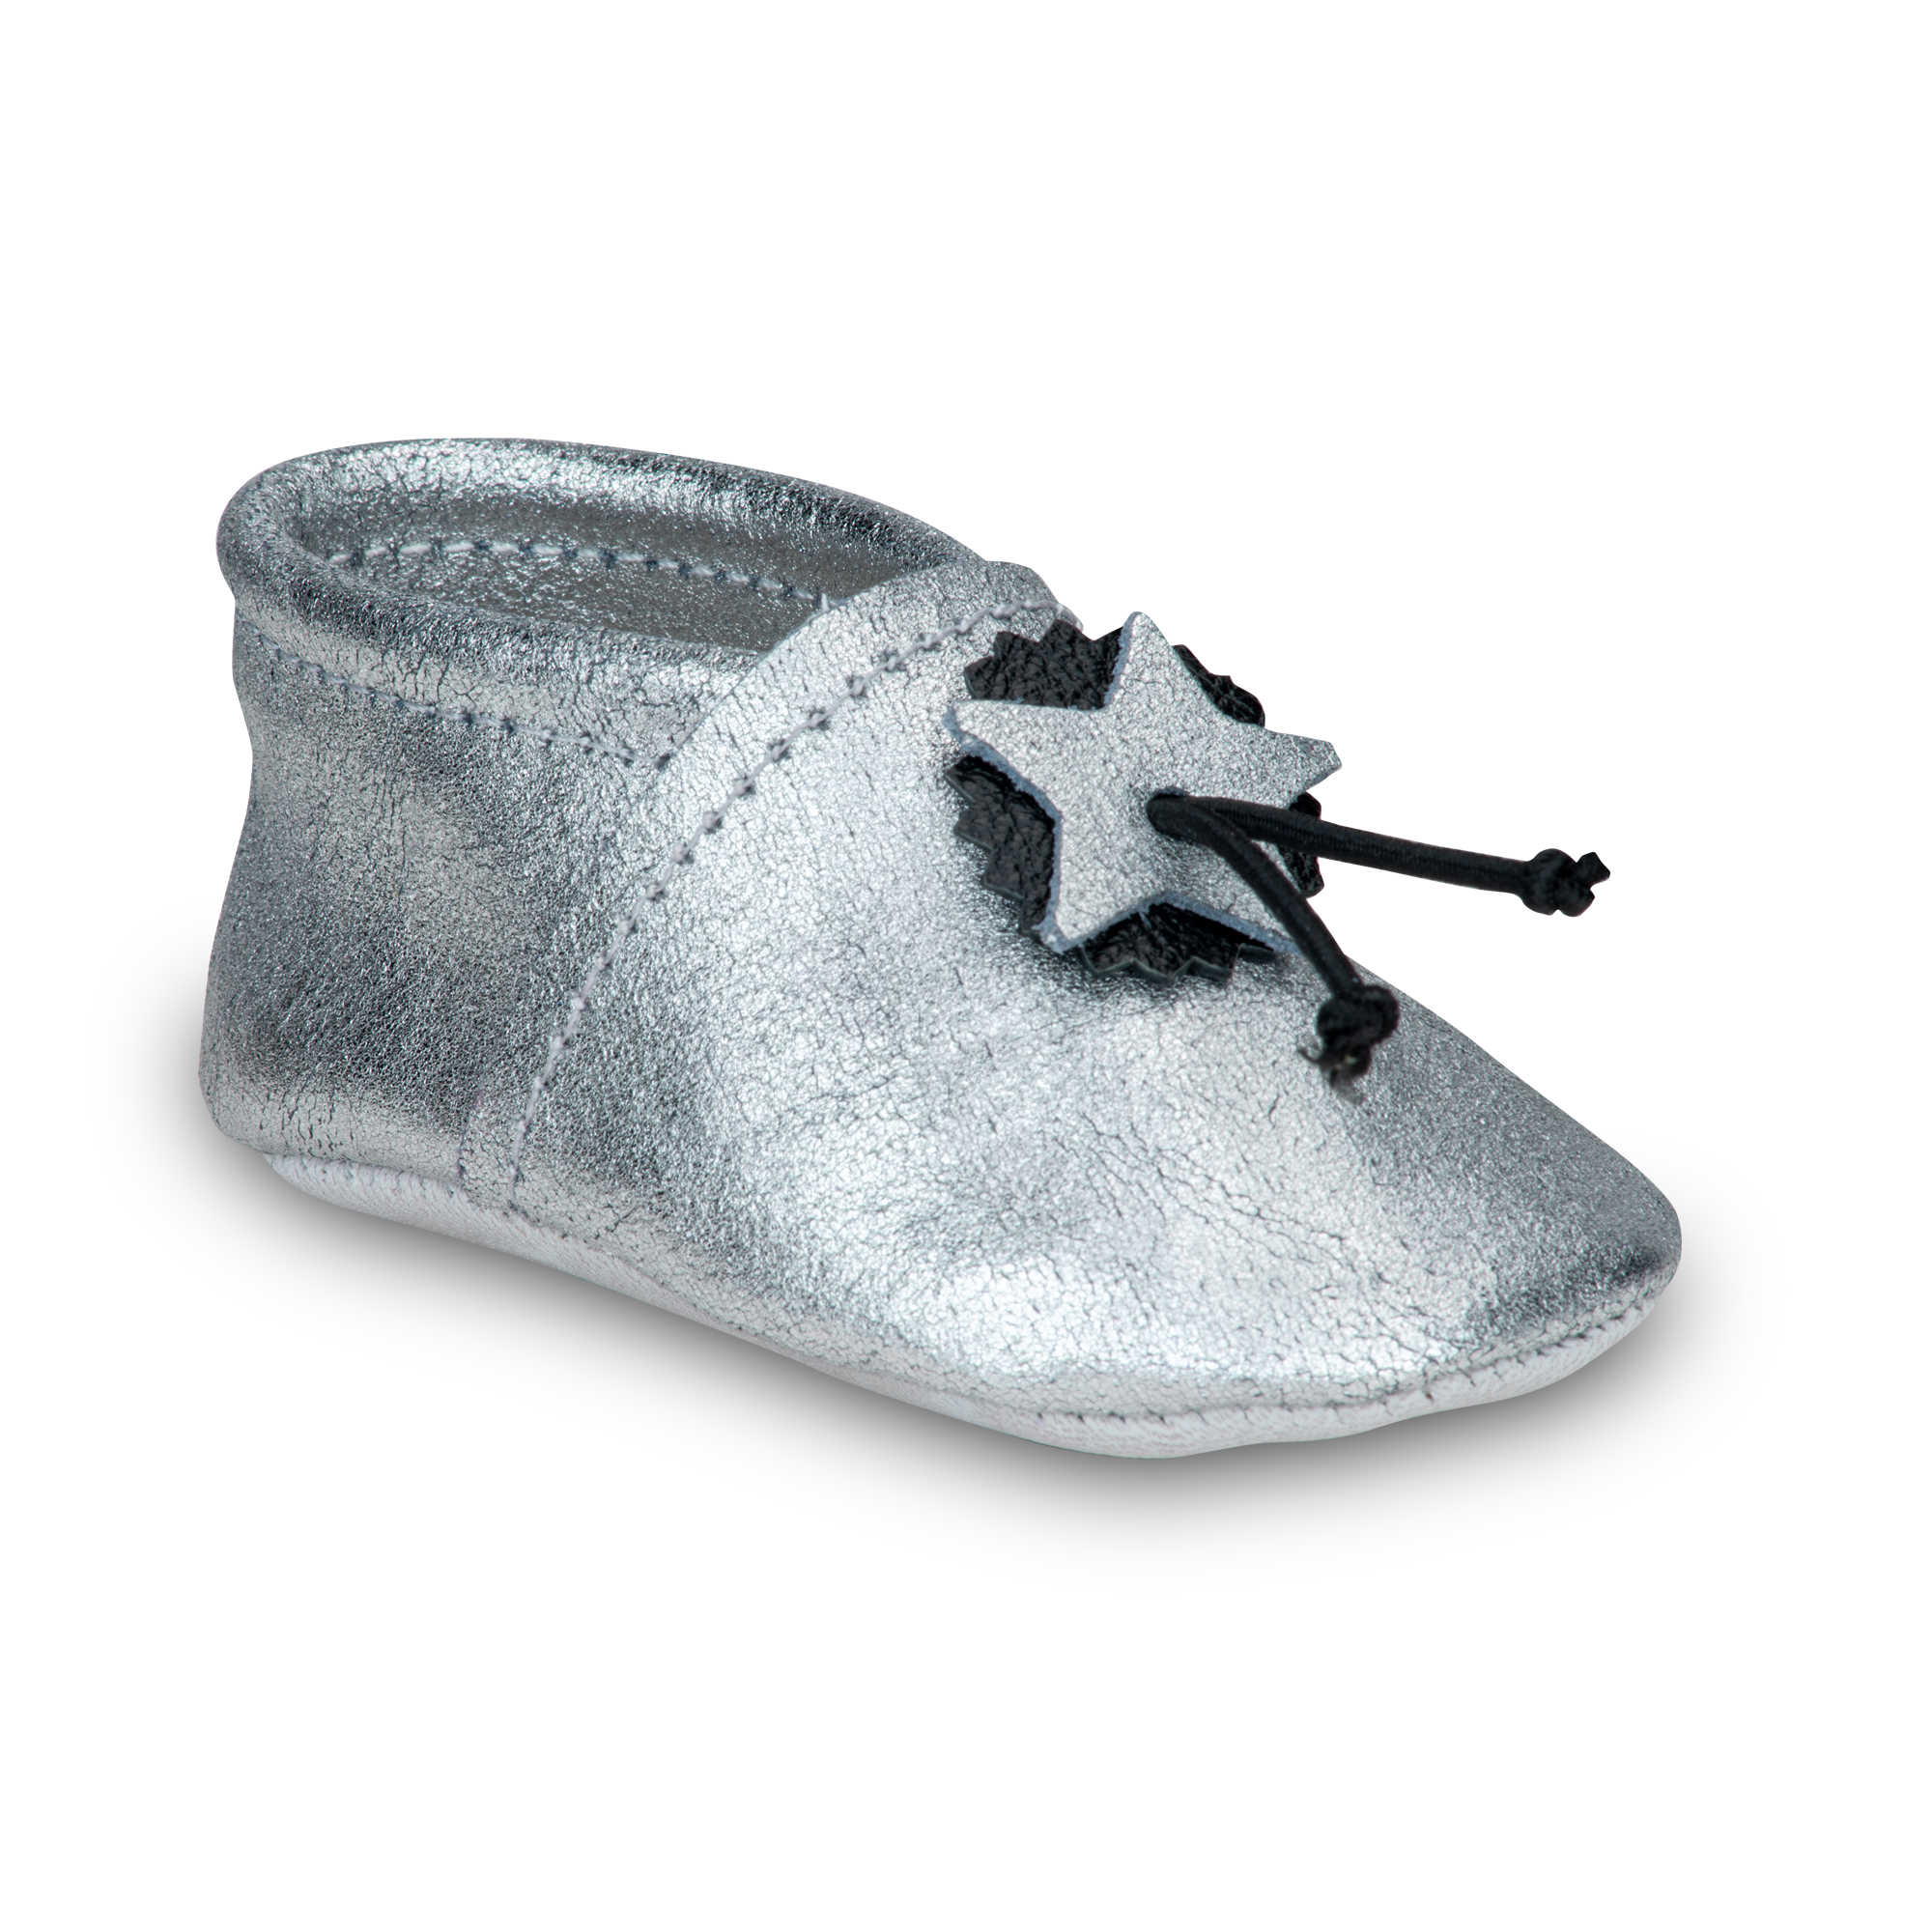 Chaussons souples bebe argente taille 16